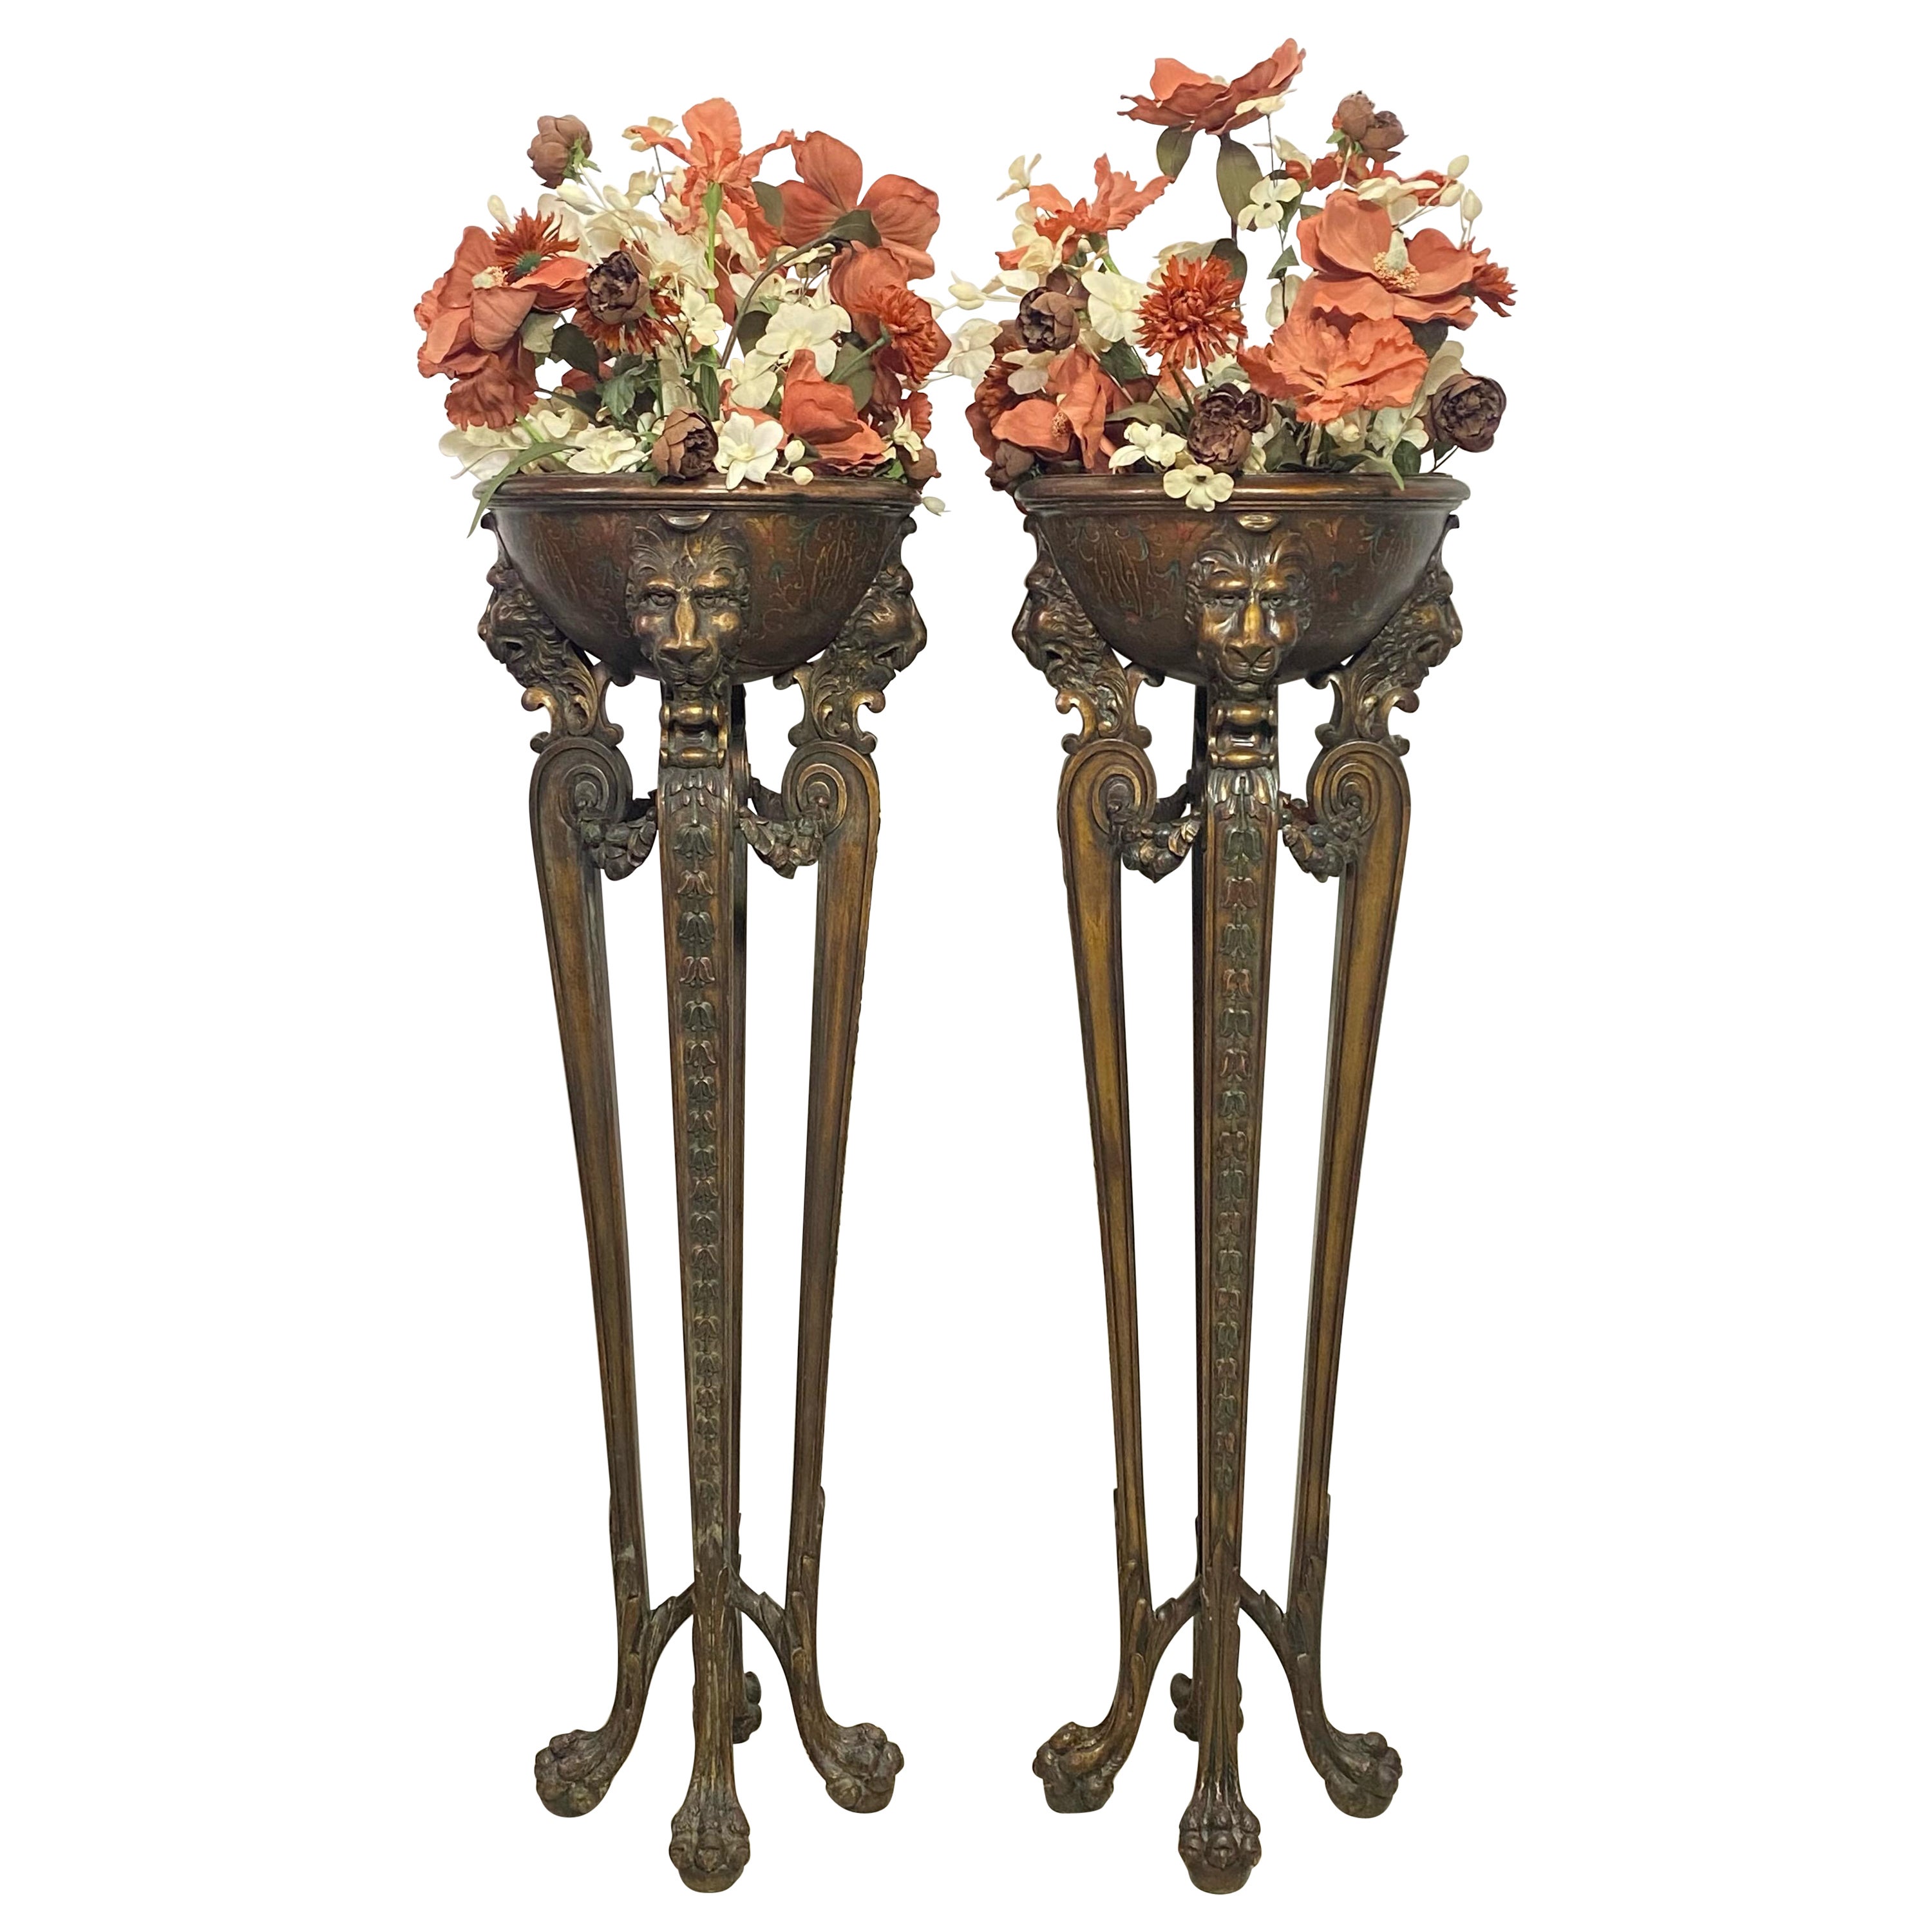 Tall Hand Carved and Painted Walnut Fern Plant Stands, Early 20th Century For Sale